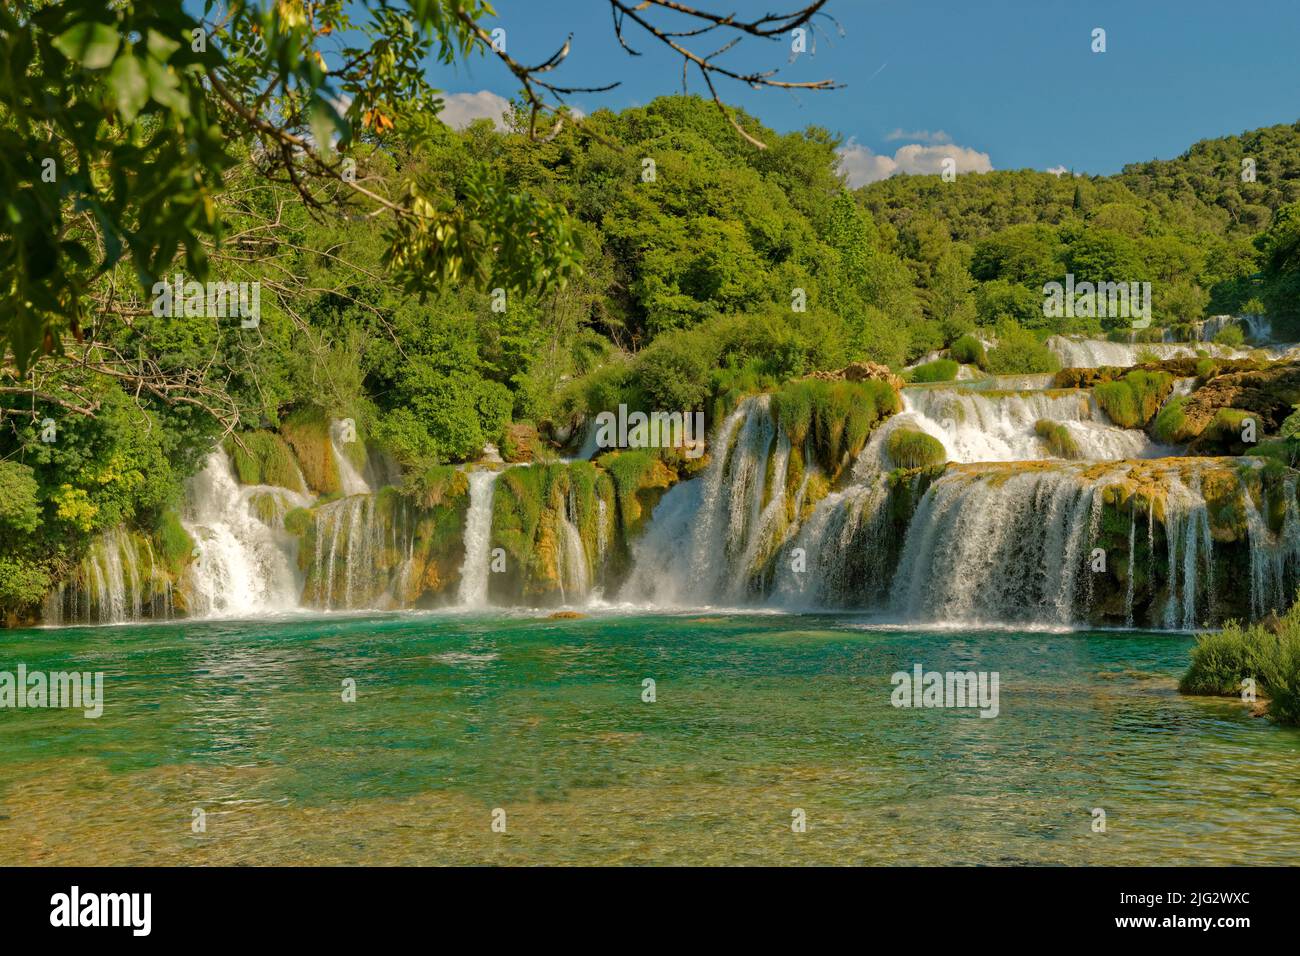 The Krka Falls above Skradin in the Krka National Park, Central Dalmatia, Croatia.  Recently the park authorities banned swimming in the falls' pools. Stock Photo